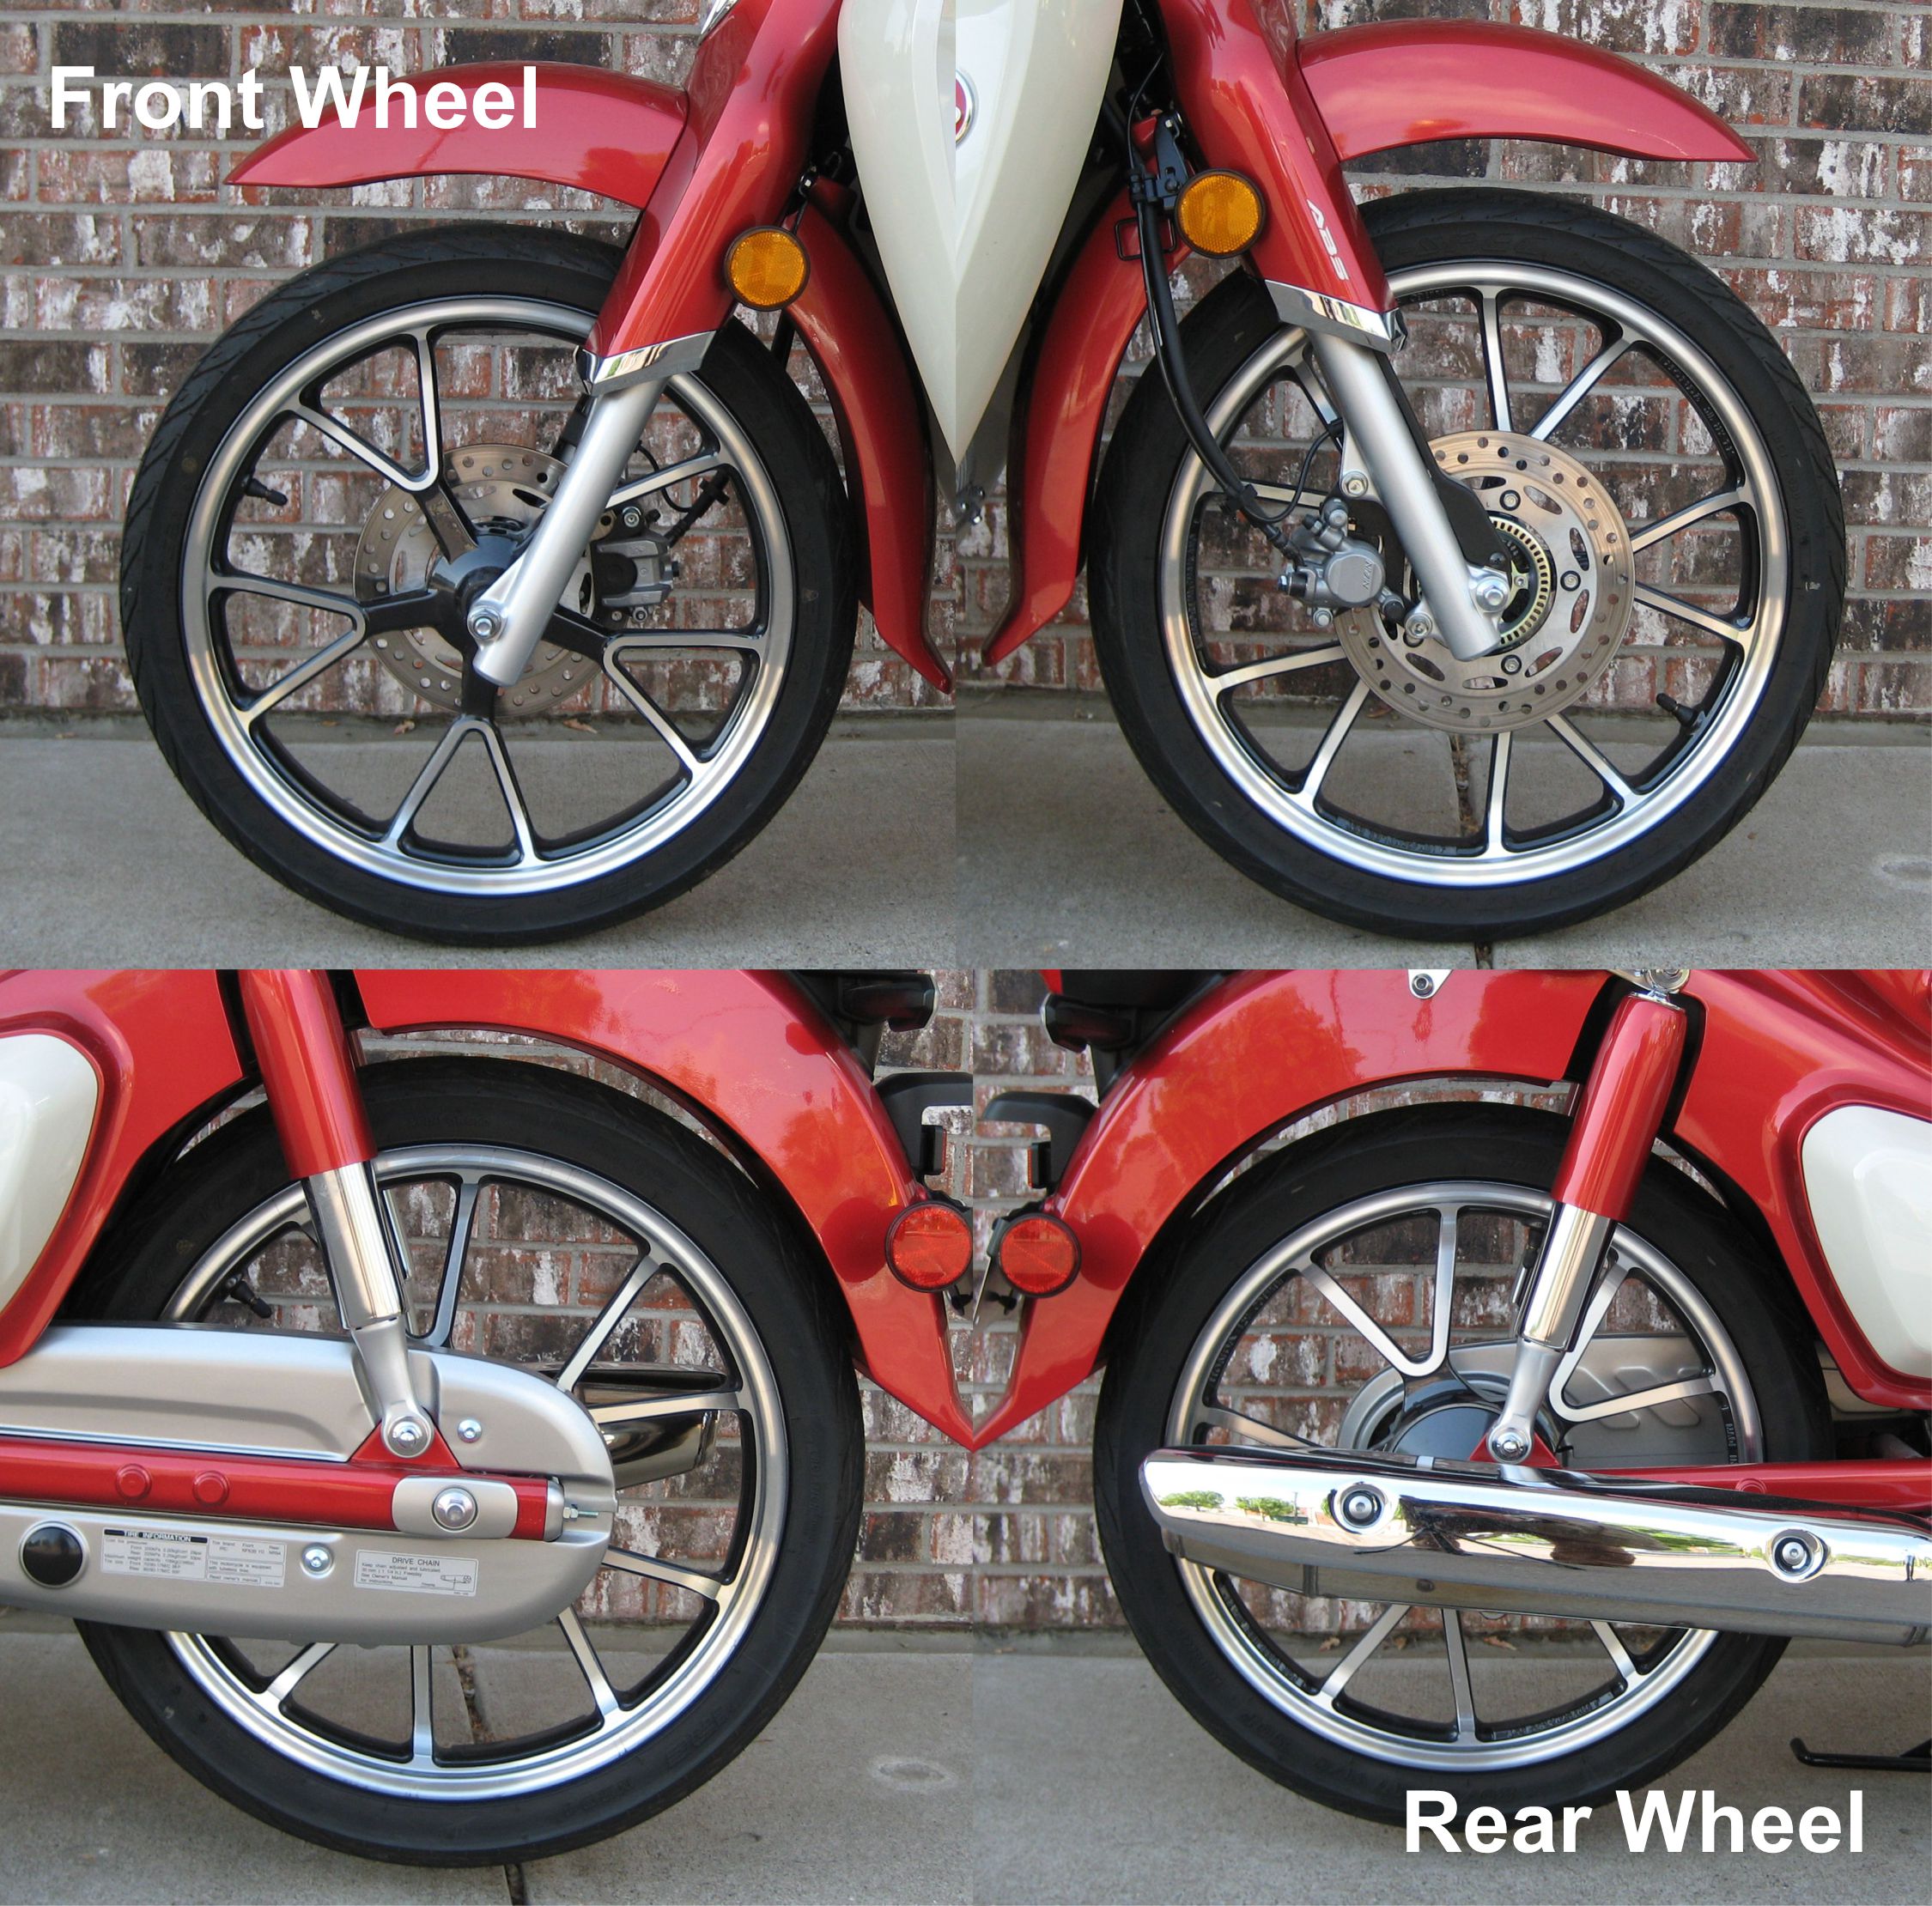 Side by side comparisons of front and rear wheels on Super Cub